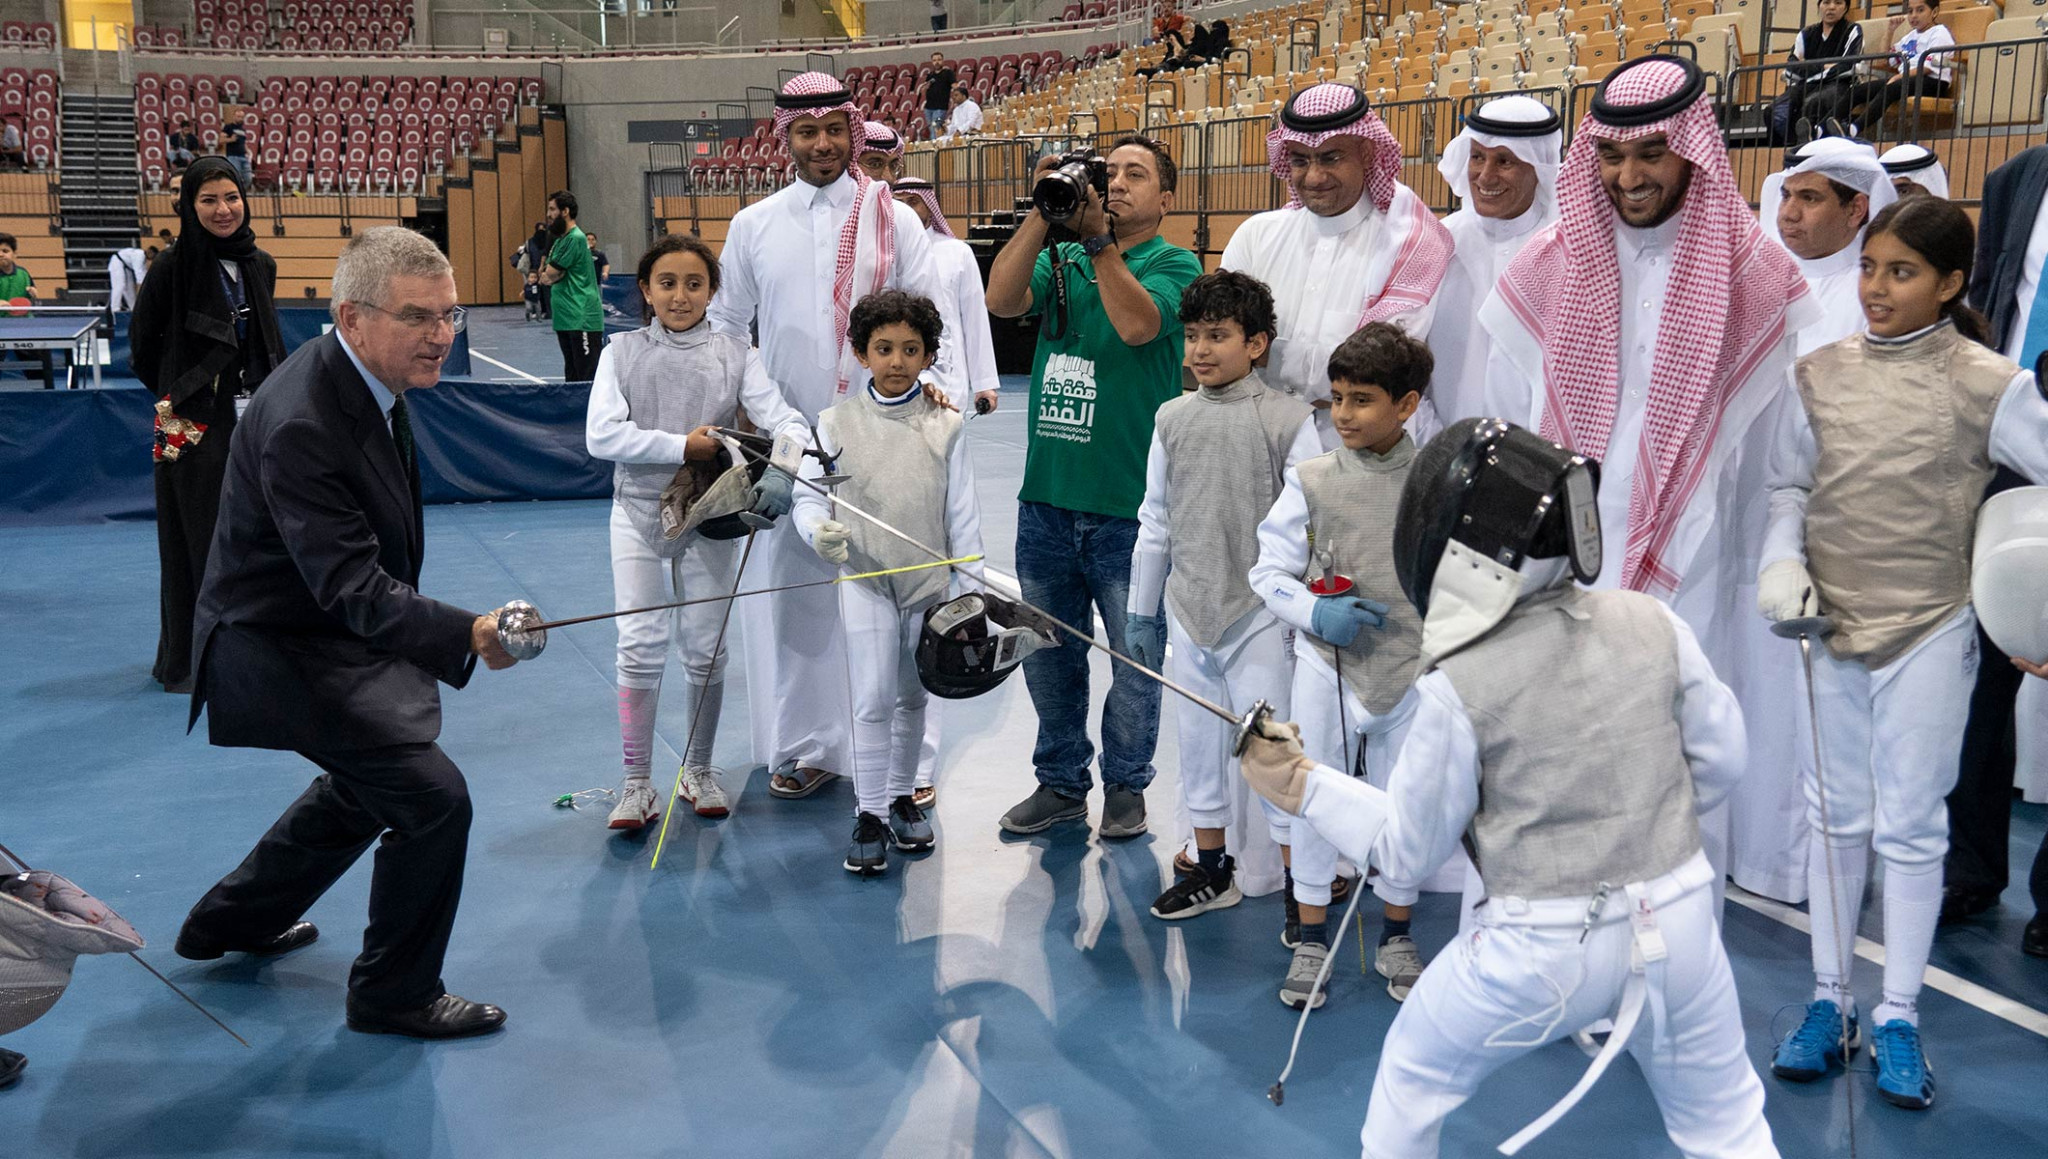 IOC President Thomas Bach took part in sport demonstrations during a visit to the Saudi Arabian Olympic Committee in Jeddah ©IOC